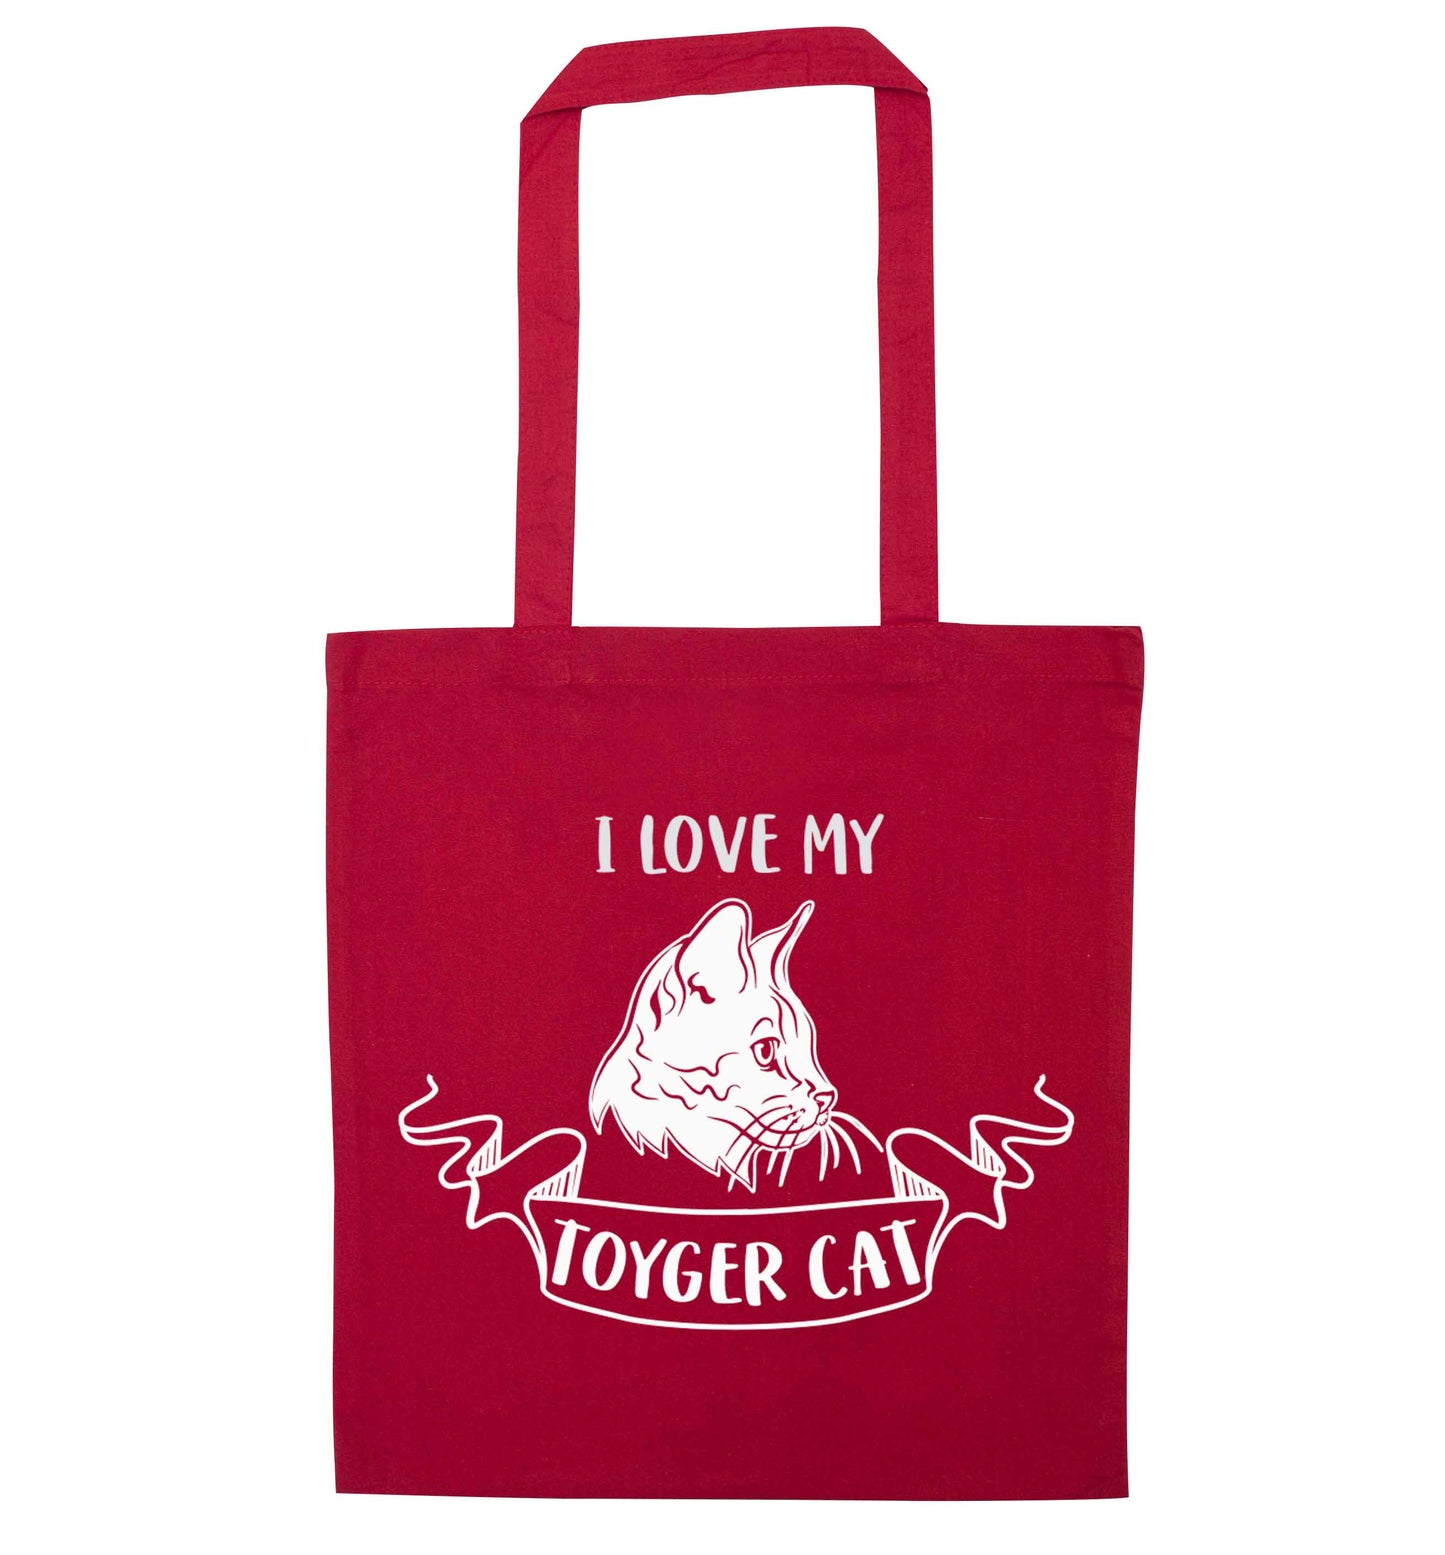 I love my toyger cat red tote bag